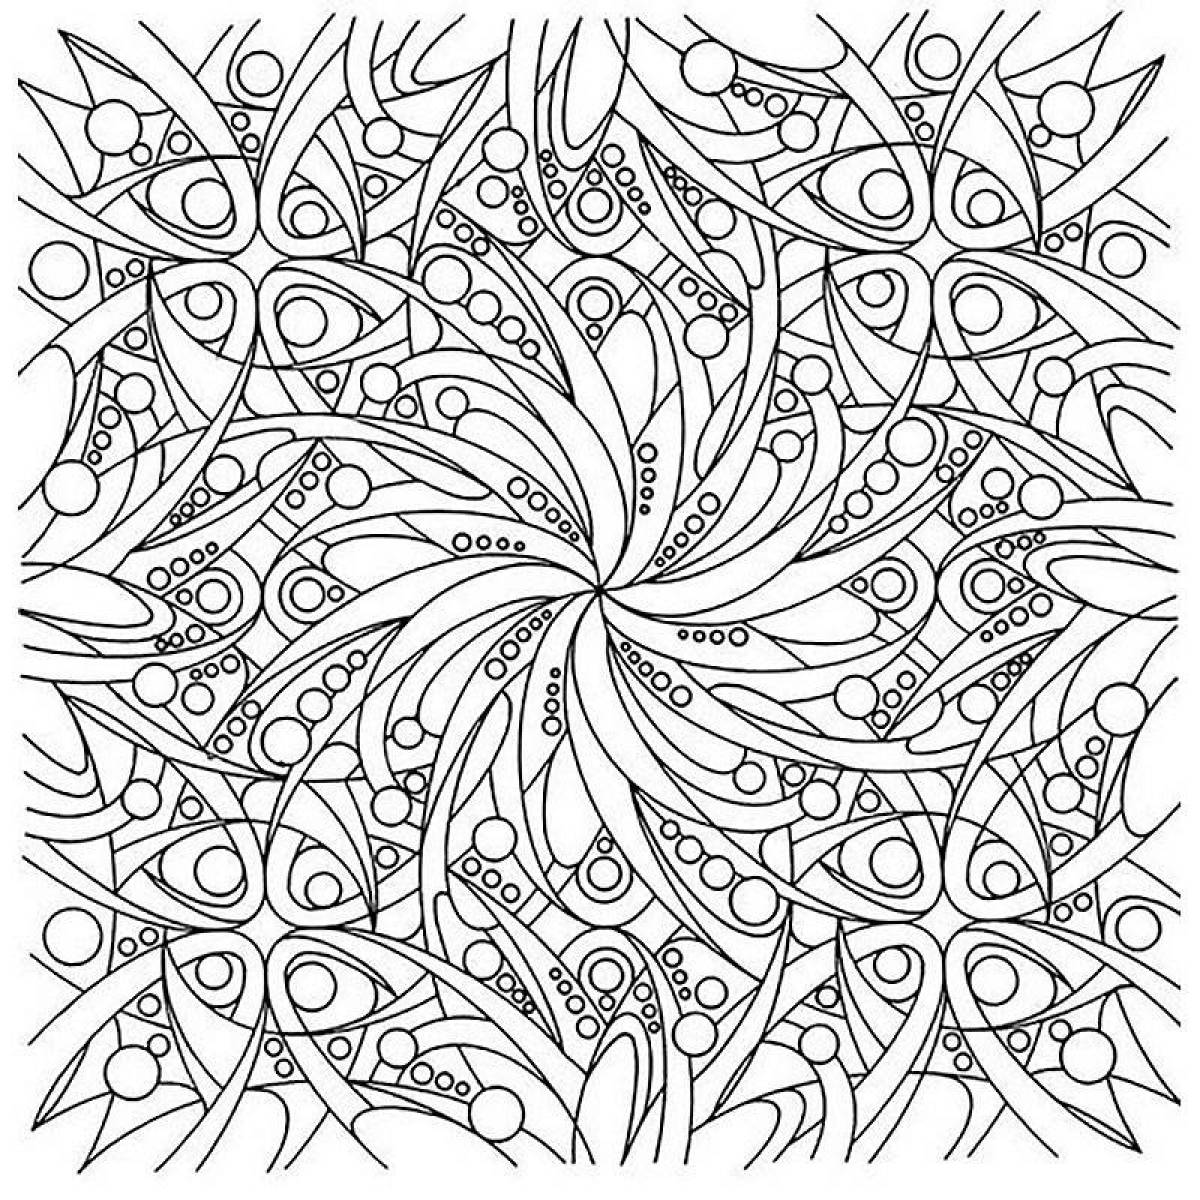 Playful adult coloring book